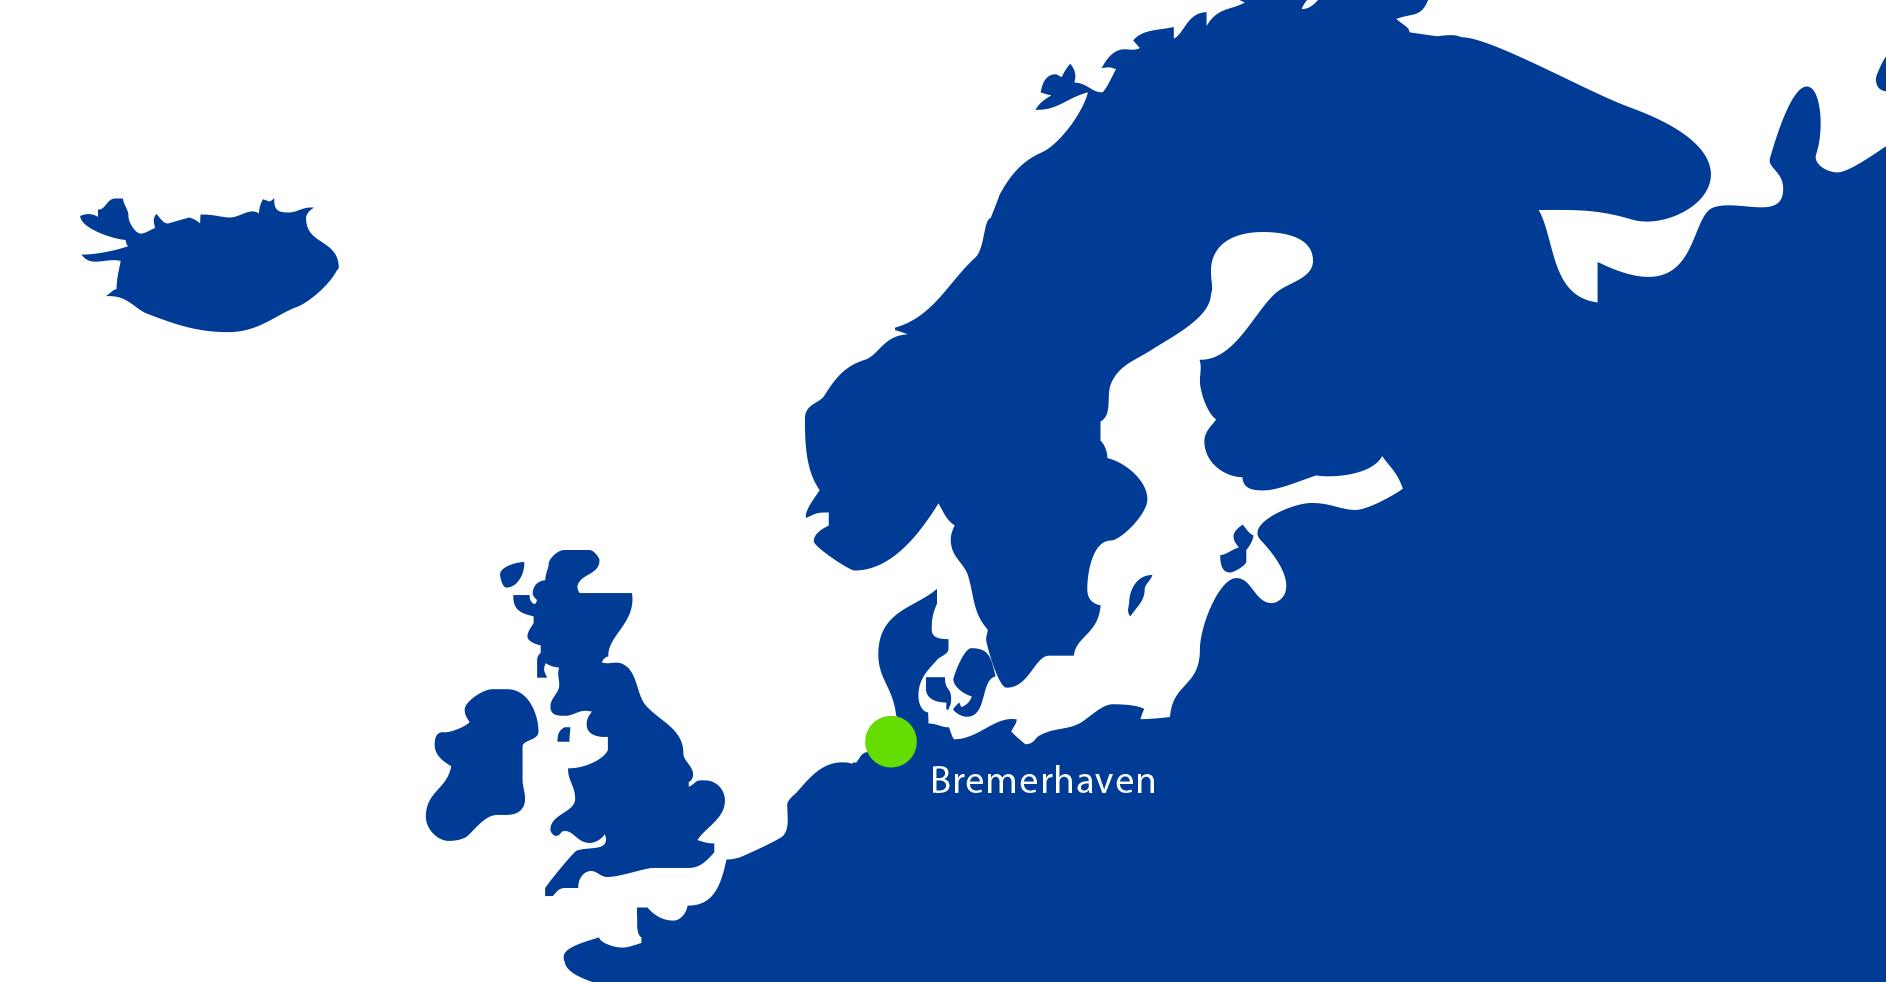 Map of Europe pinpointing city of Bremerhaven 